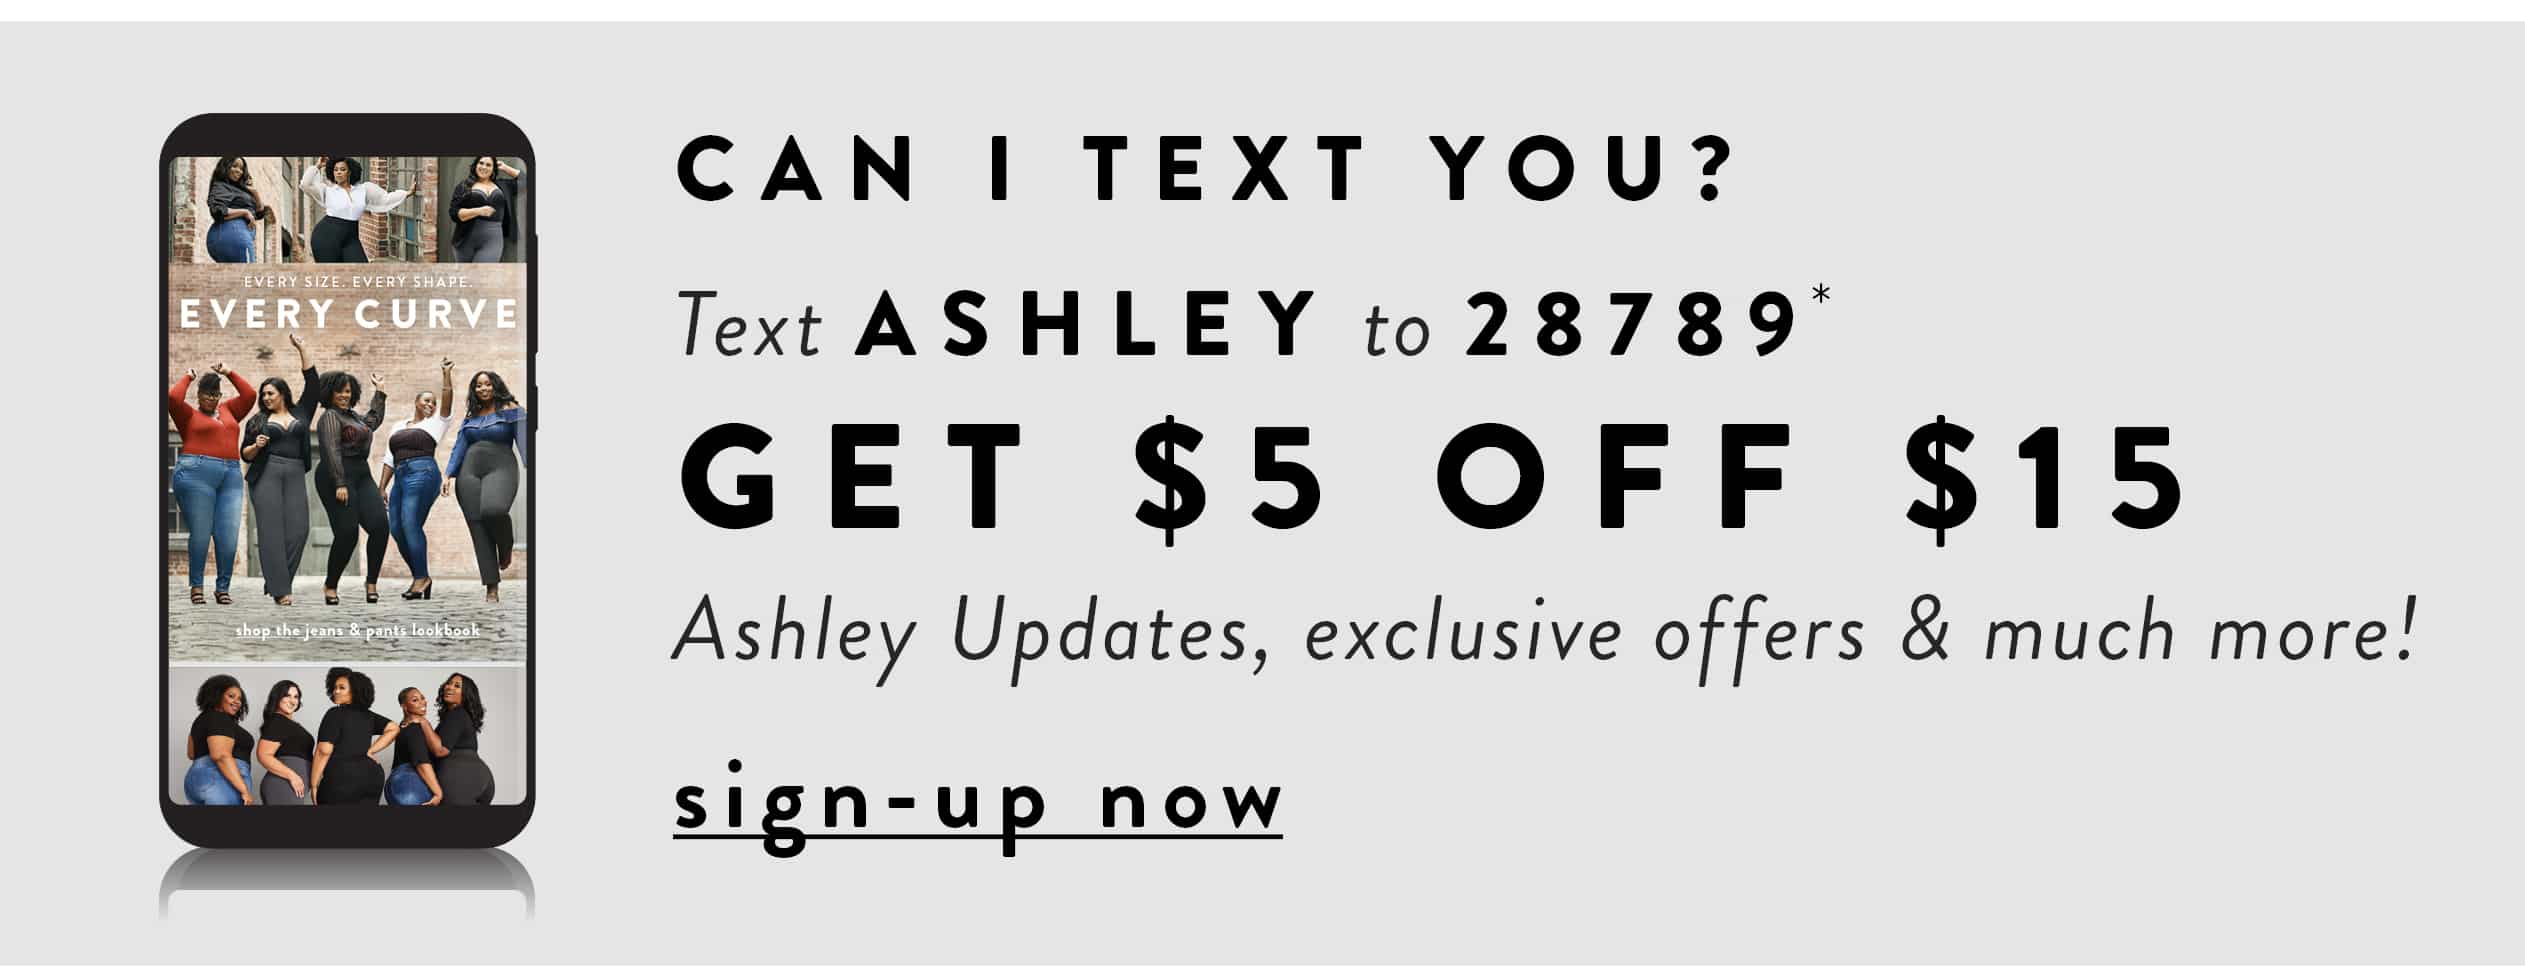 Can I text you? Text ASHLEY to 28789* Get $5 off $15, Ashley Updates, exclusive offers & much more!